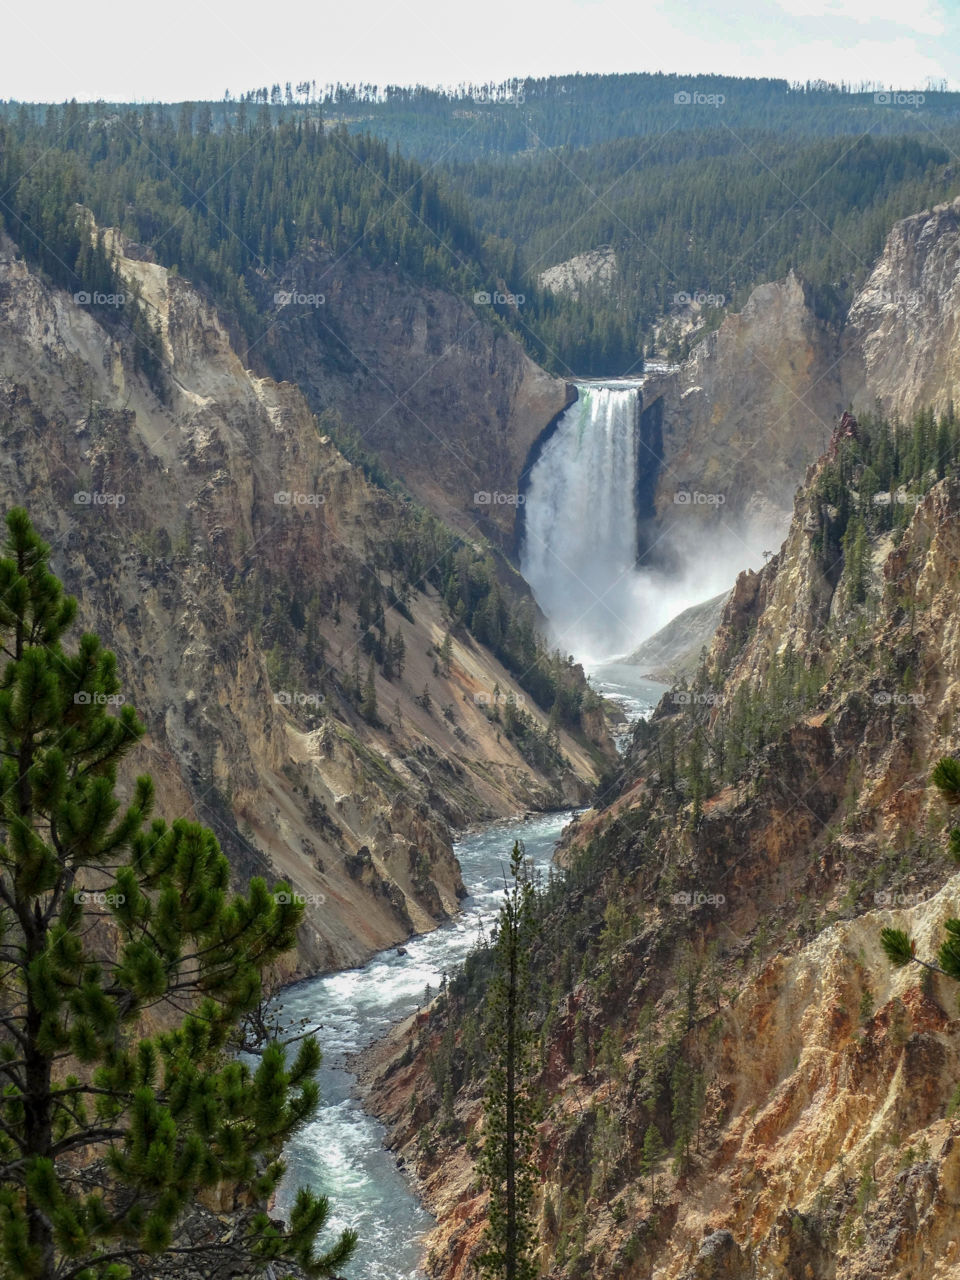 The famous Yellowstone River waterfall in Yellowstone National Park, Wyoming. The yellow cliffs on either side give the river and park their name.